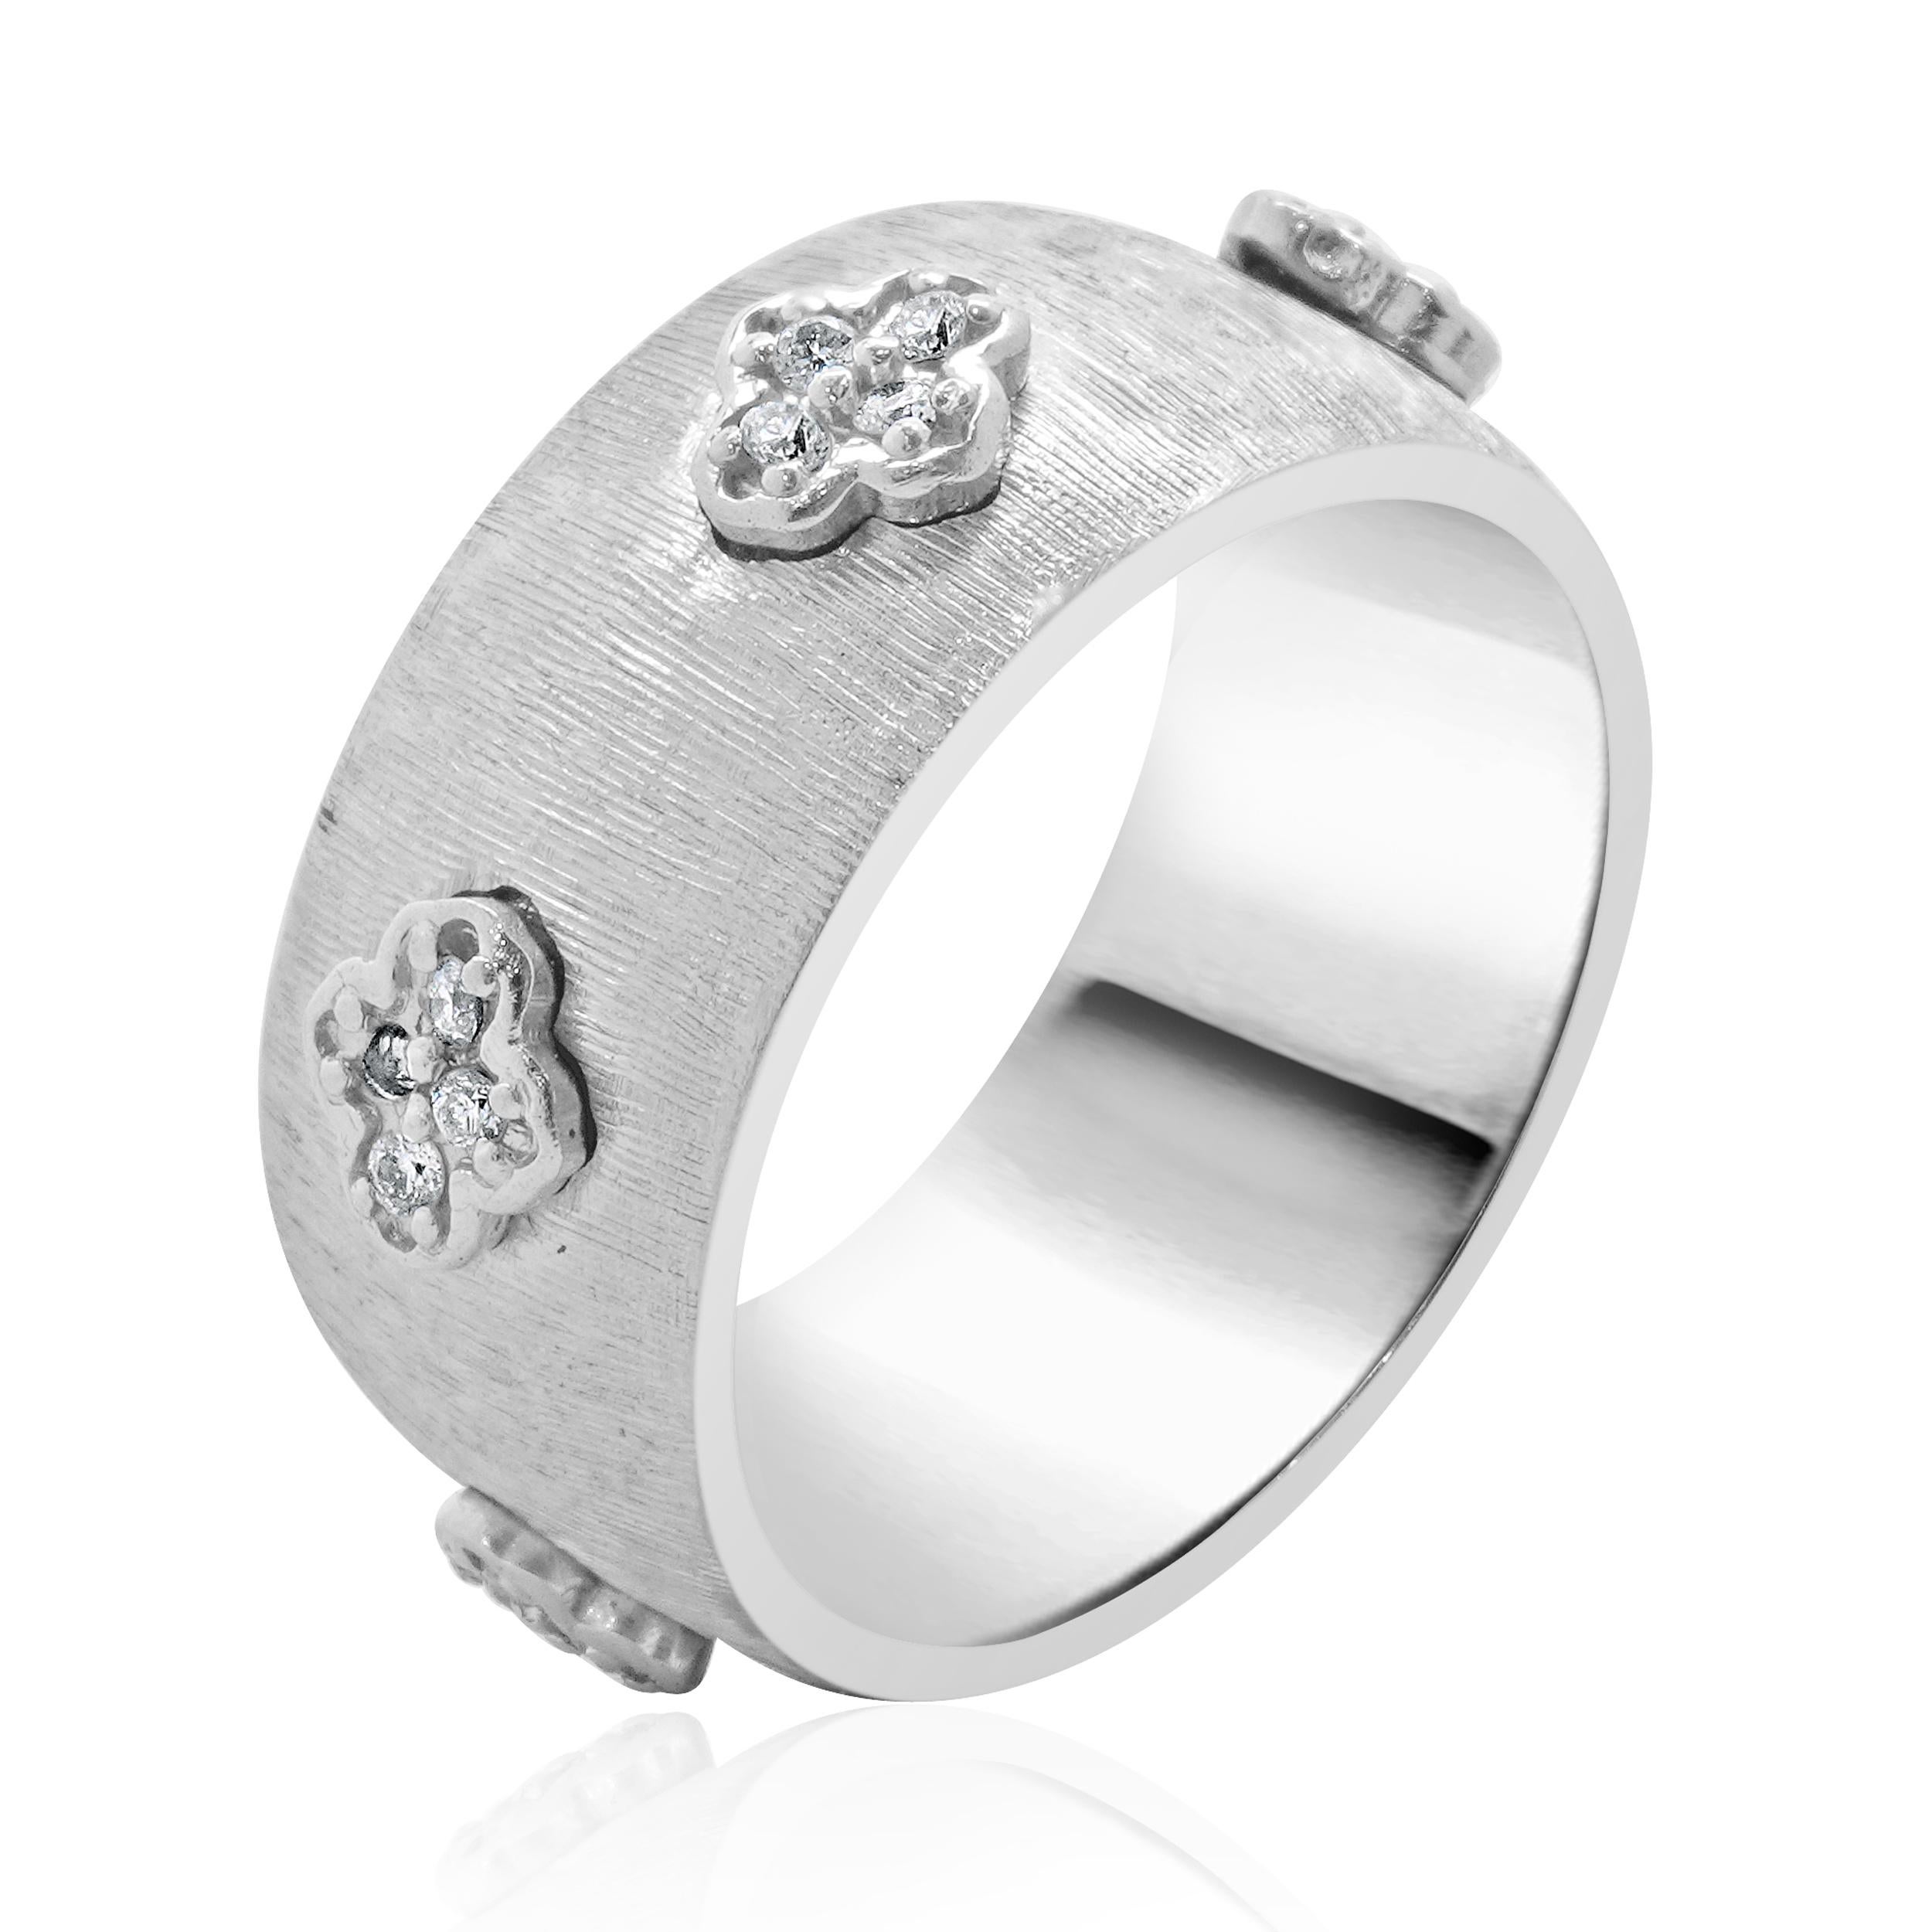 Designer: custom
Material: 14K white gold
Diamond: round brilliant cut = 0.28cttw
Color: H
Clarity: SI1
Ring size: 6 (please allow two additional shipping days for sizing requests)
Weight: 10.70 grams